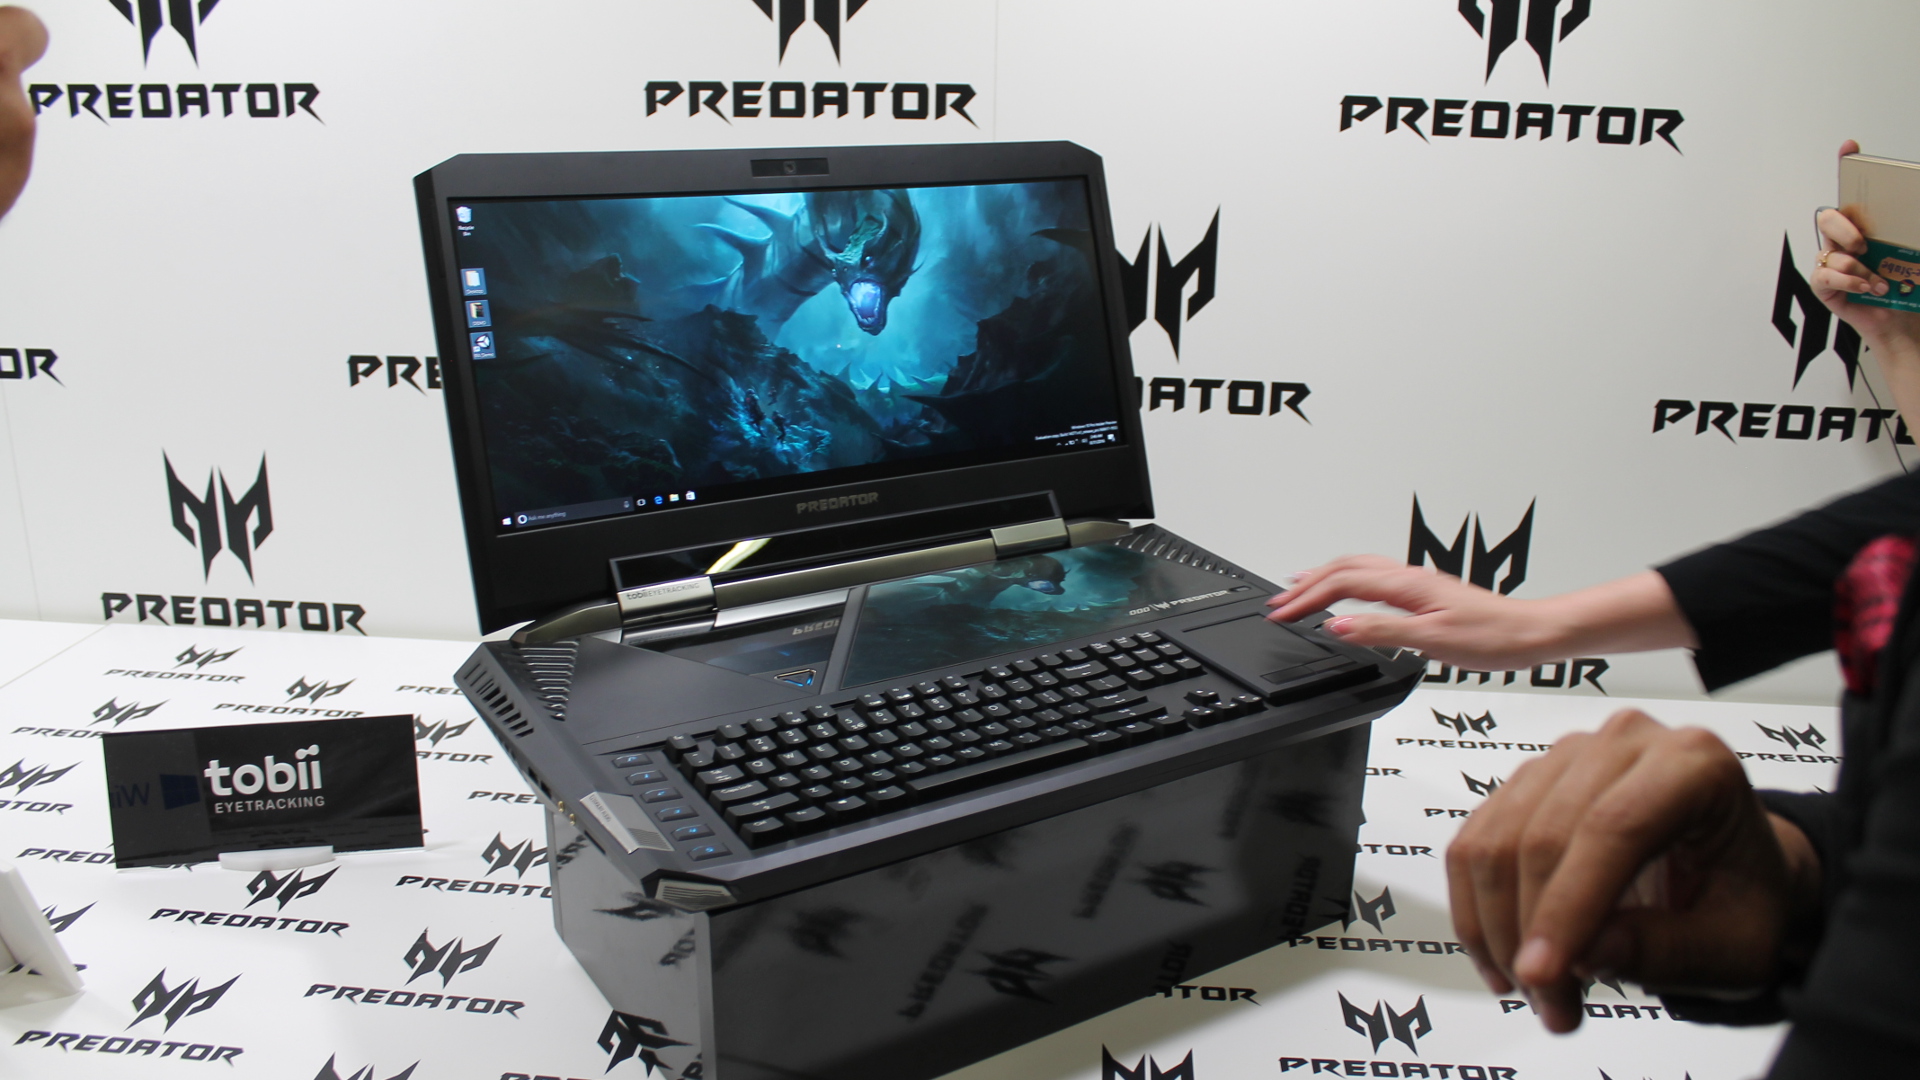 Acer's gaming laptop could become the perfect mobile workstation TechRadar